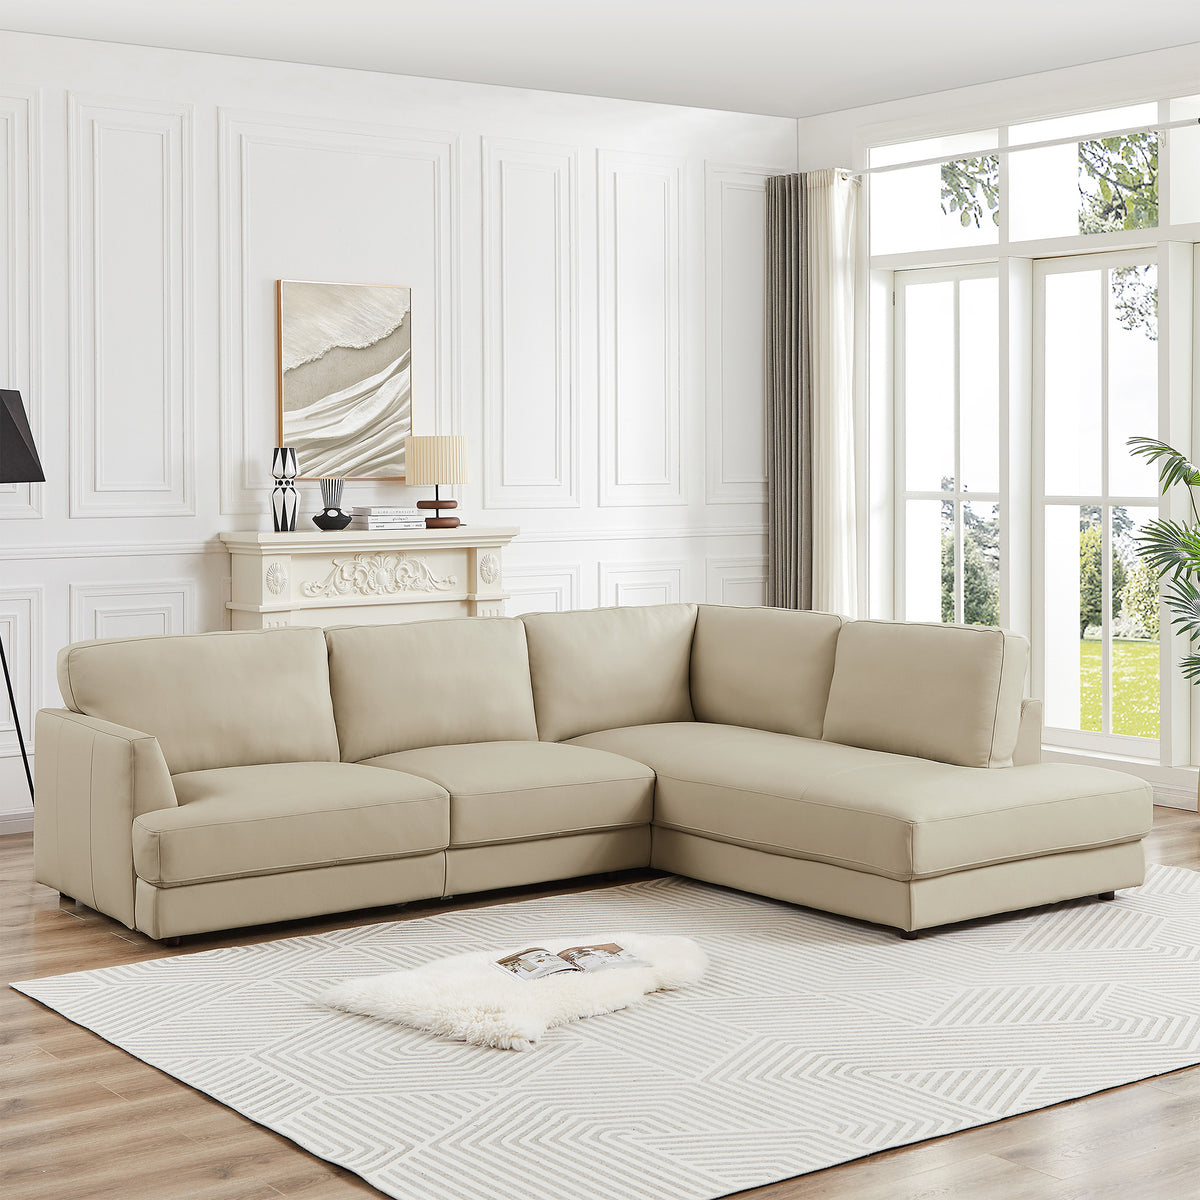 Glendale Sectional Right (Cream Leather)